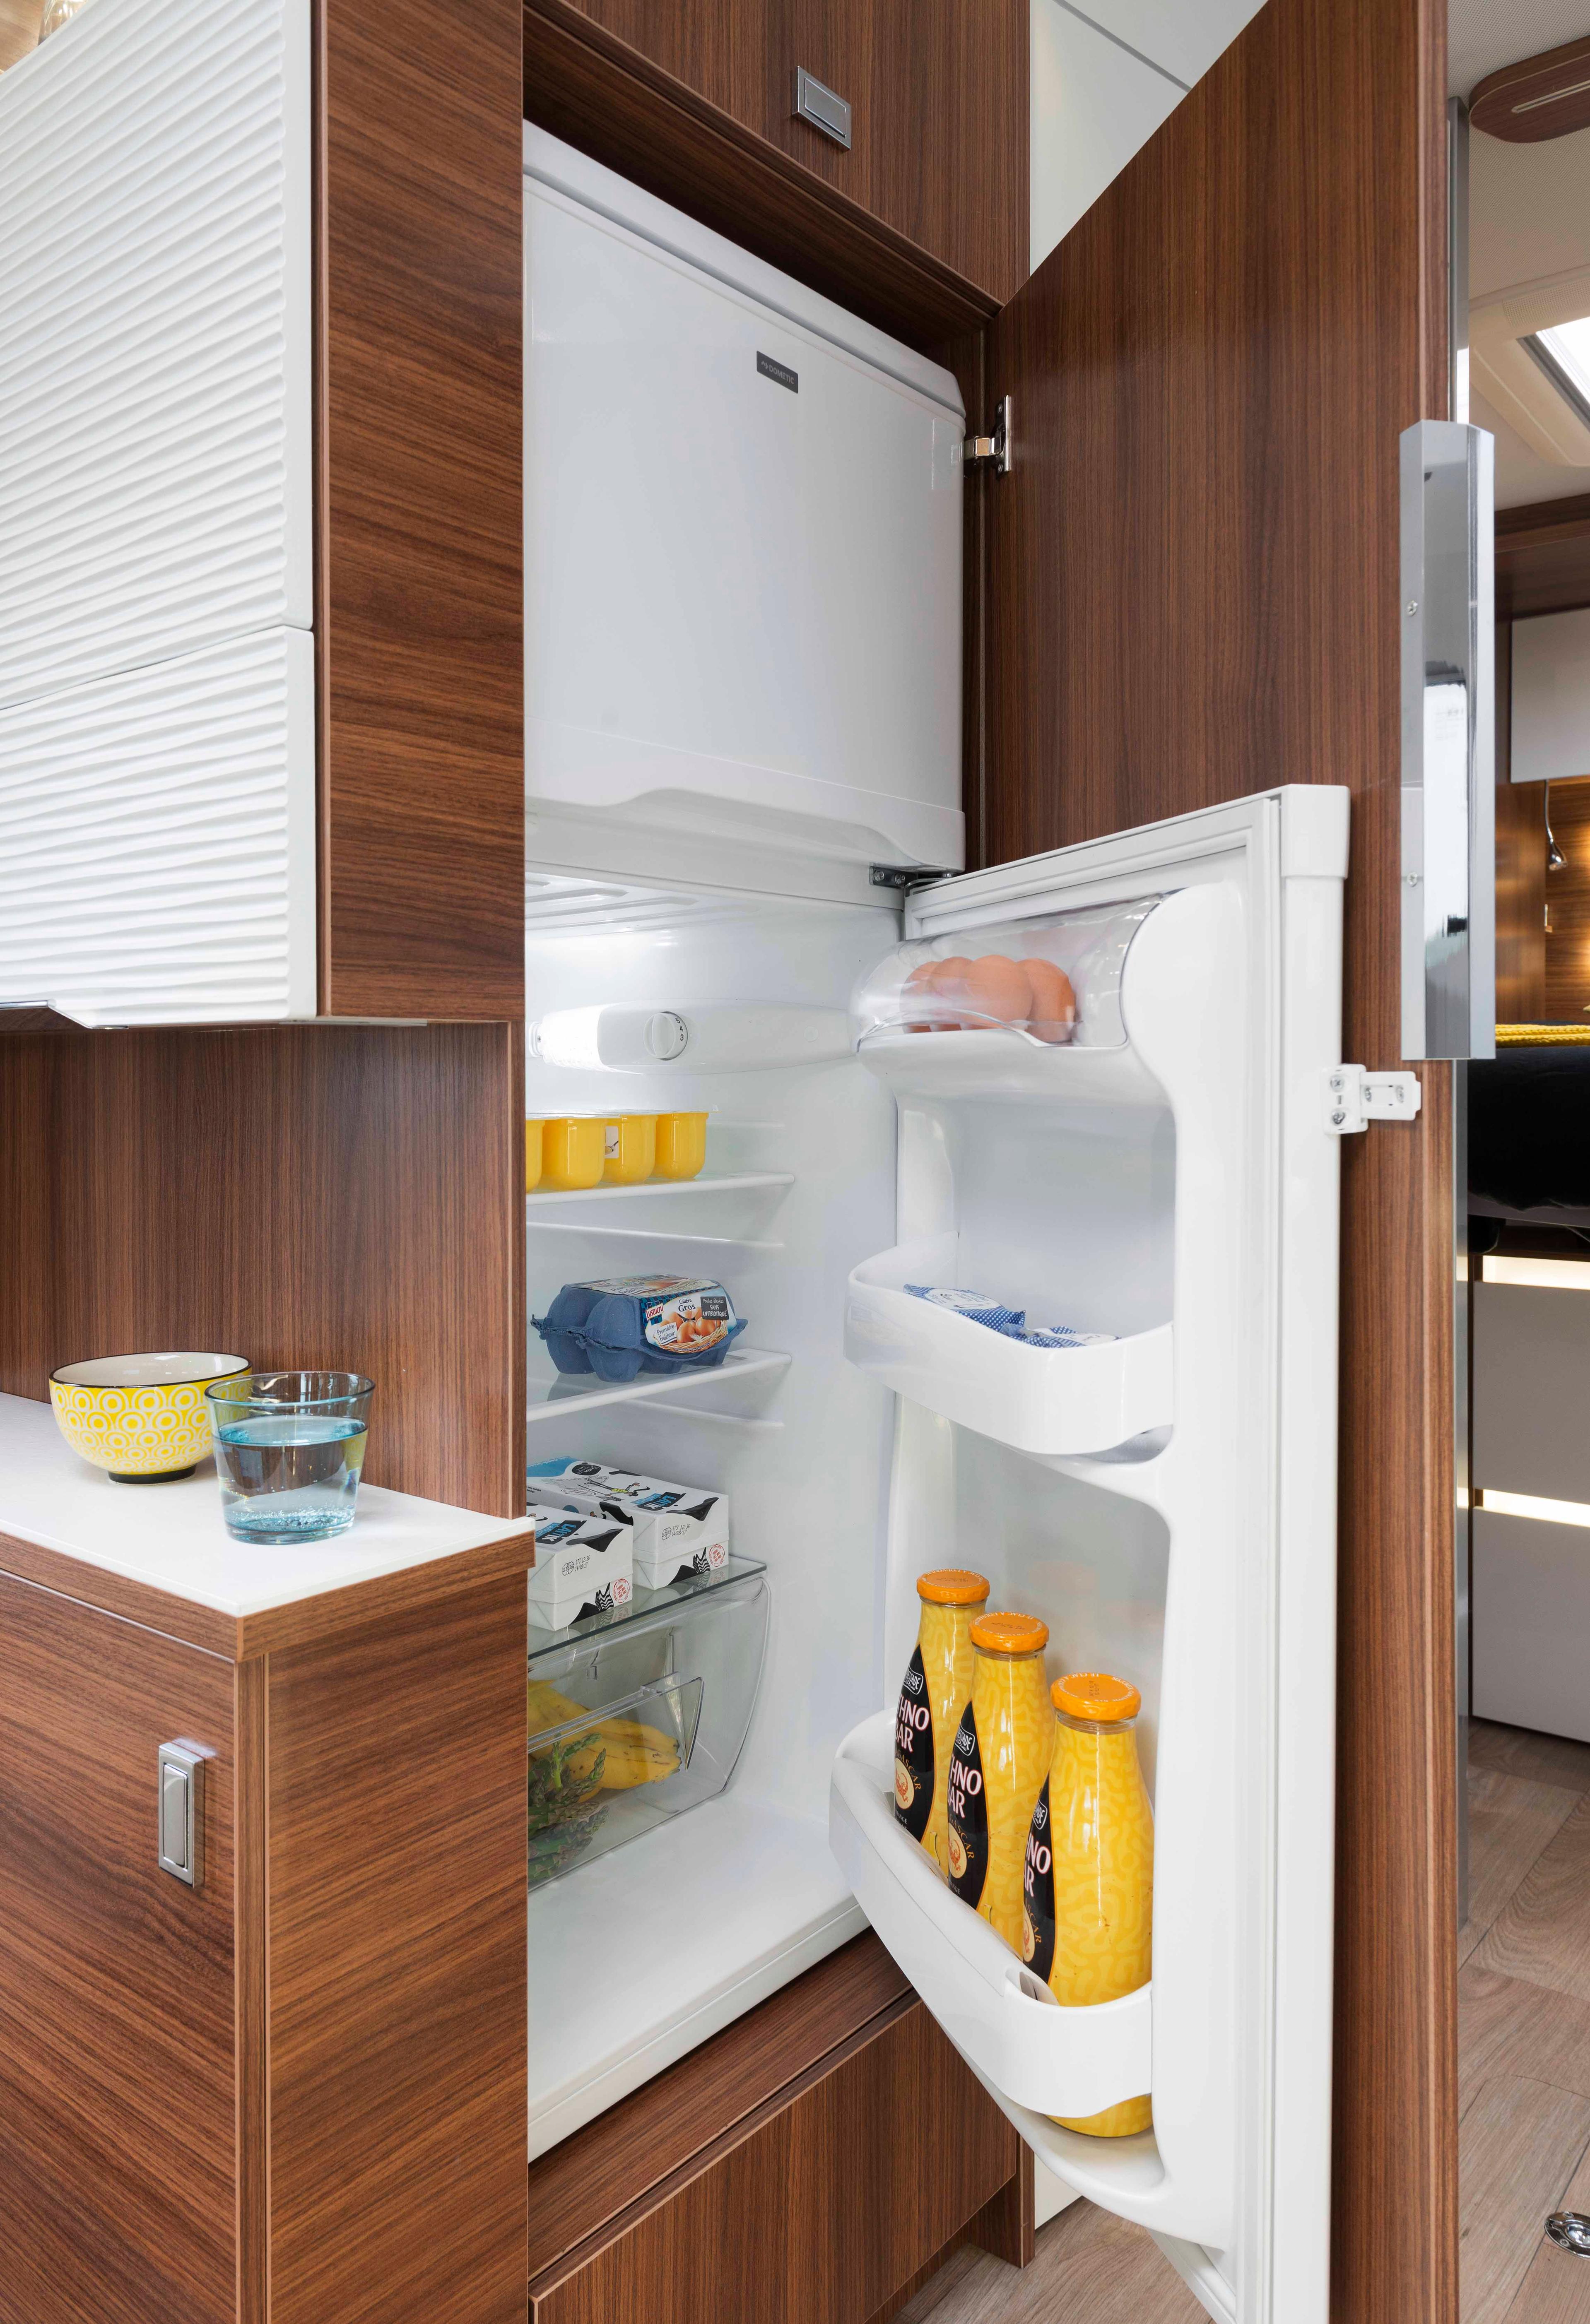 Built-in refrigerator - how to choose it? – image 3